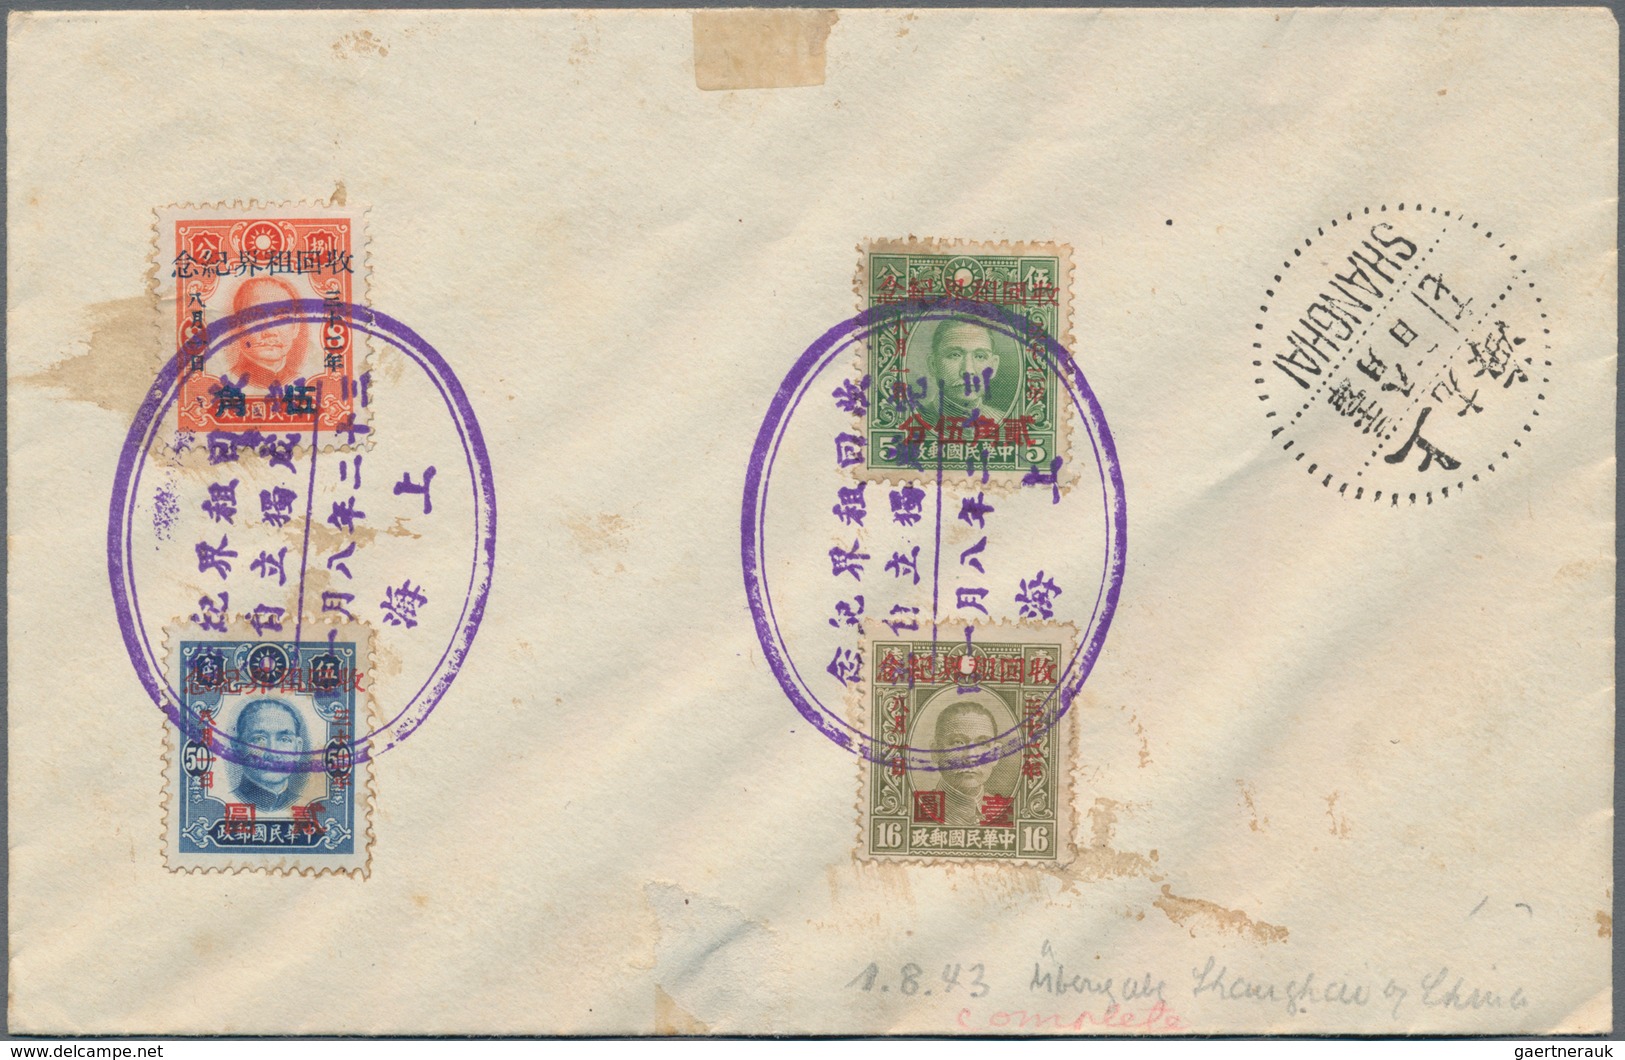 Japanische Besetzung  WK II - China - Zentralchina / Central China: 1938/44, unovpt. issues on cover